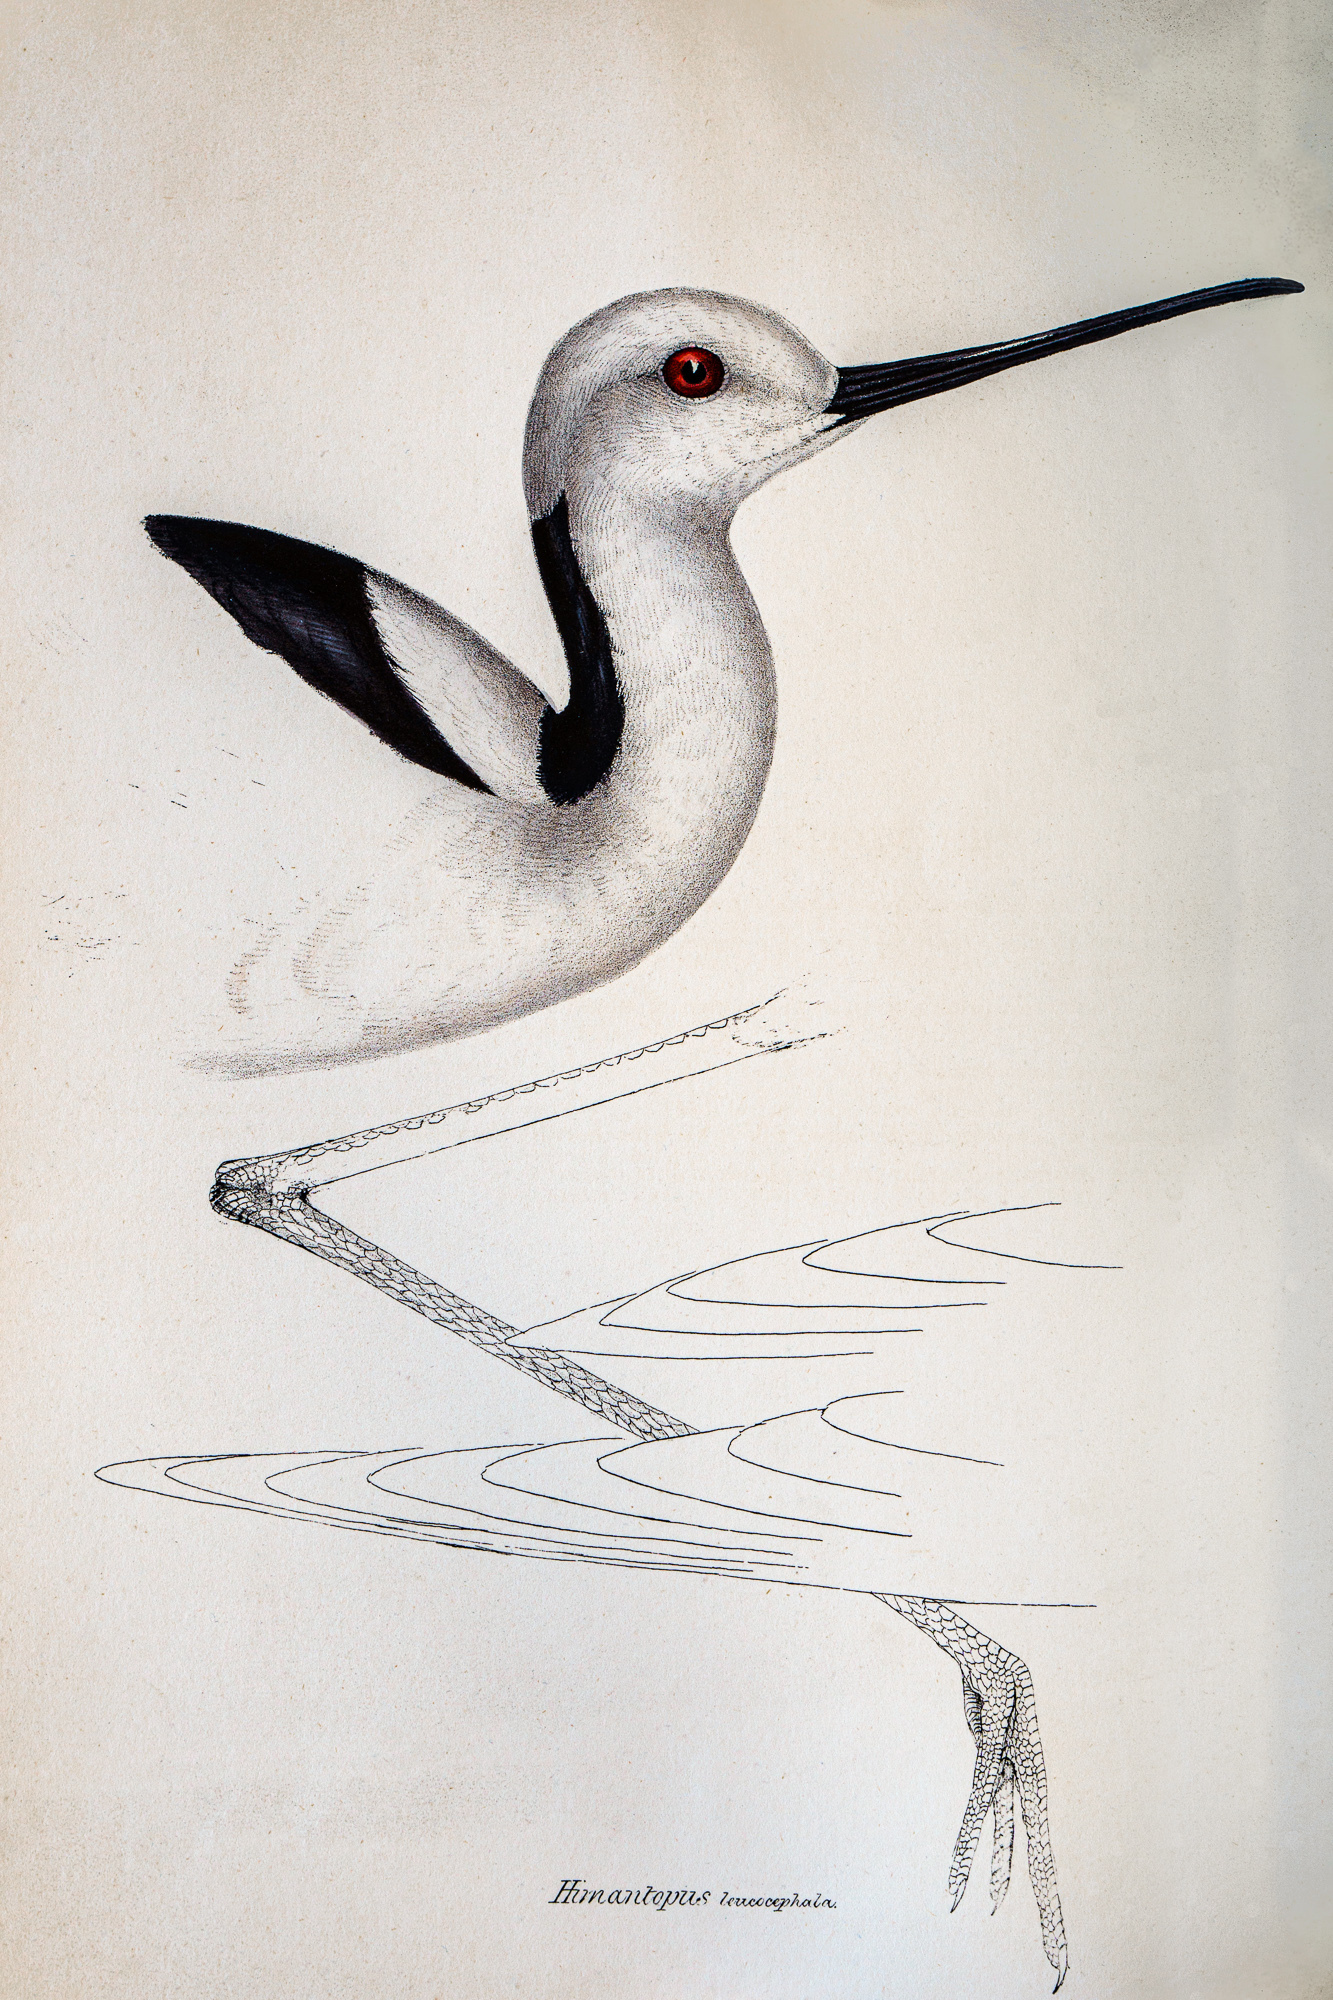 Gould's Synopsis - Himantopus